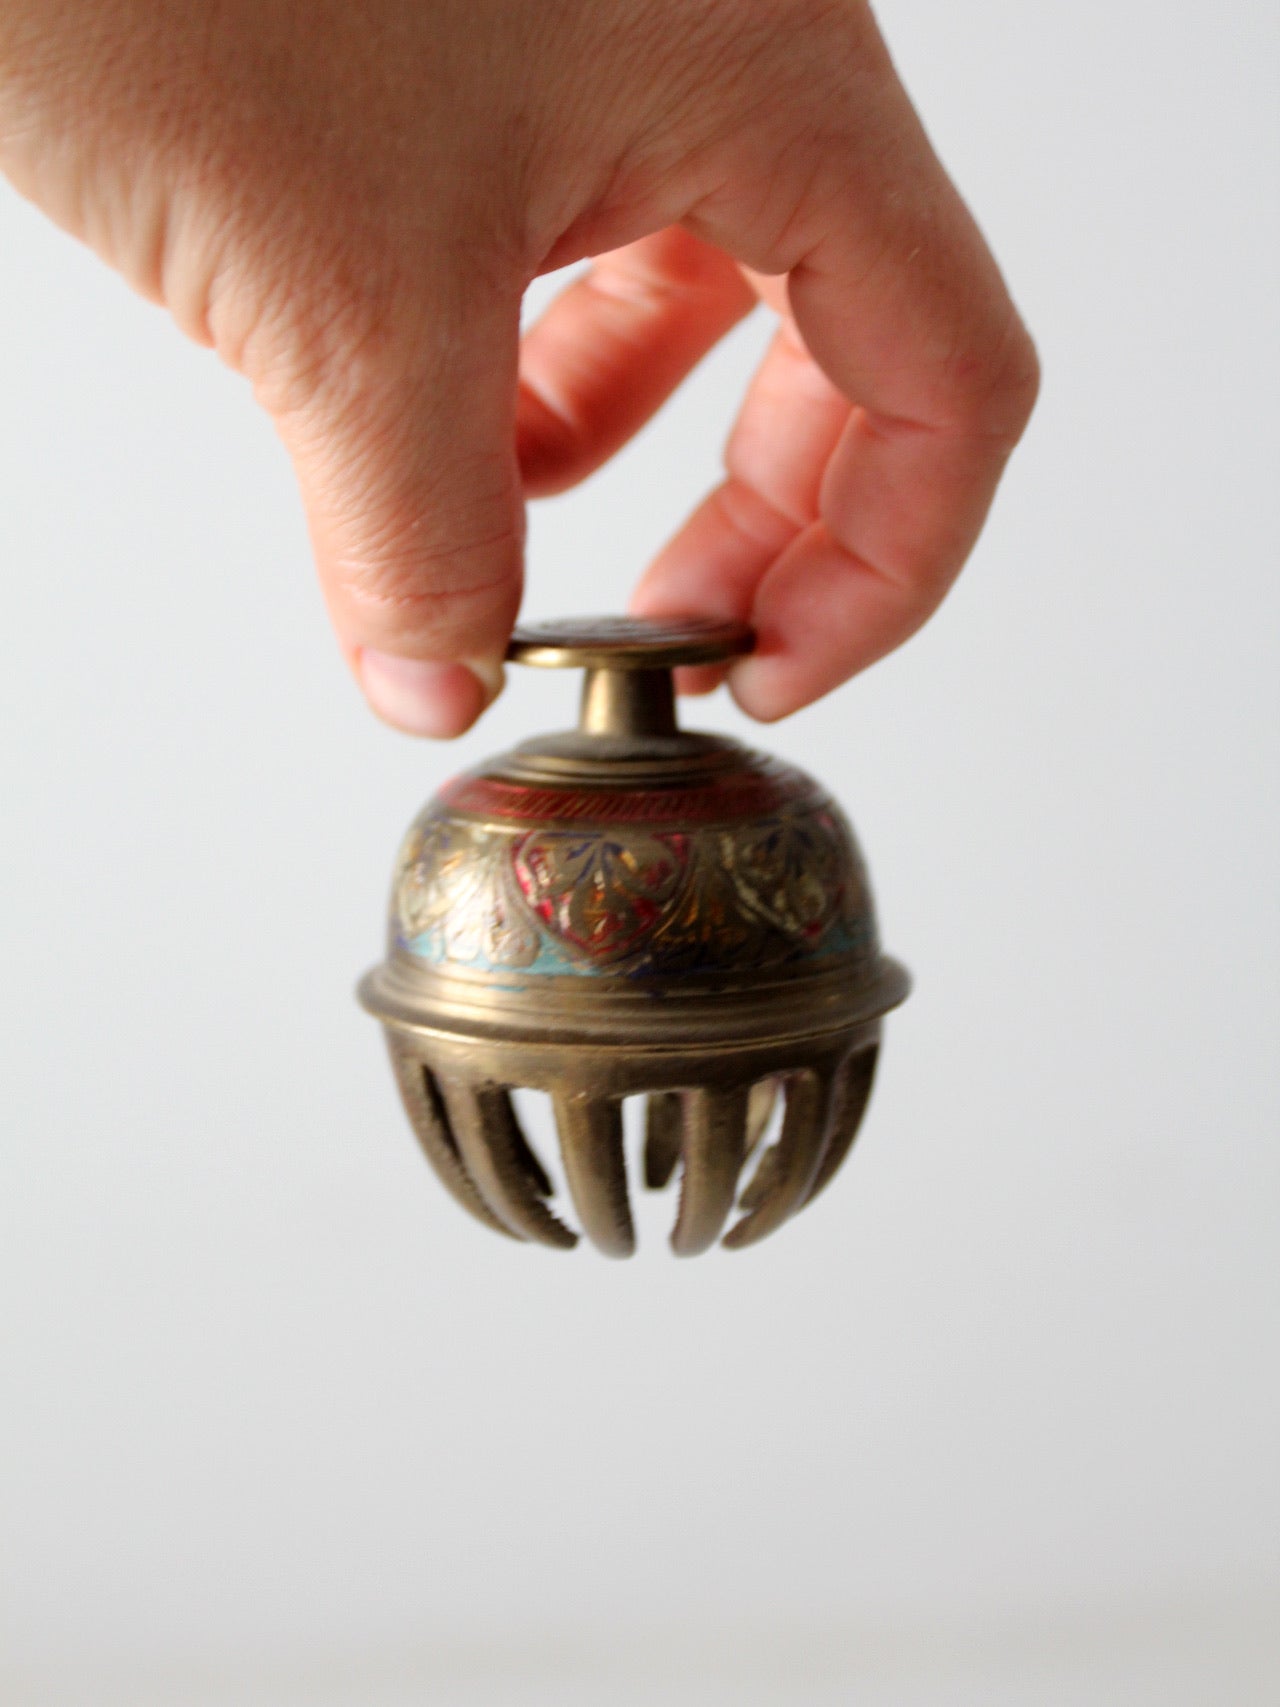 antique elephant claw bell